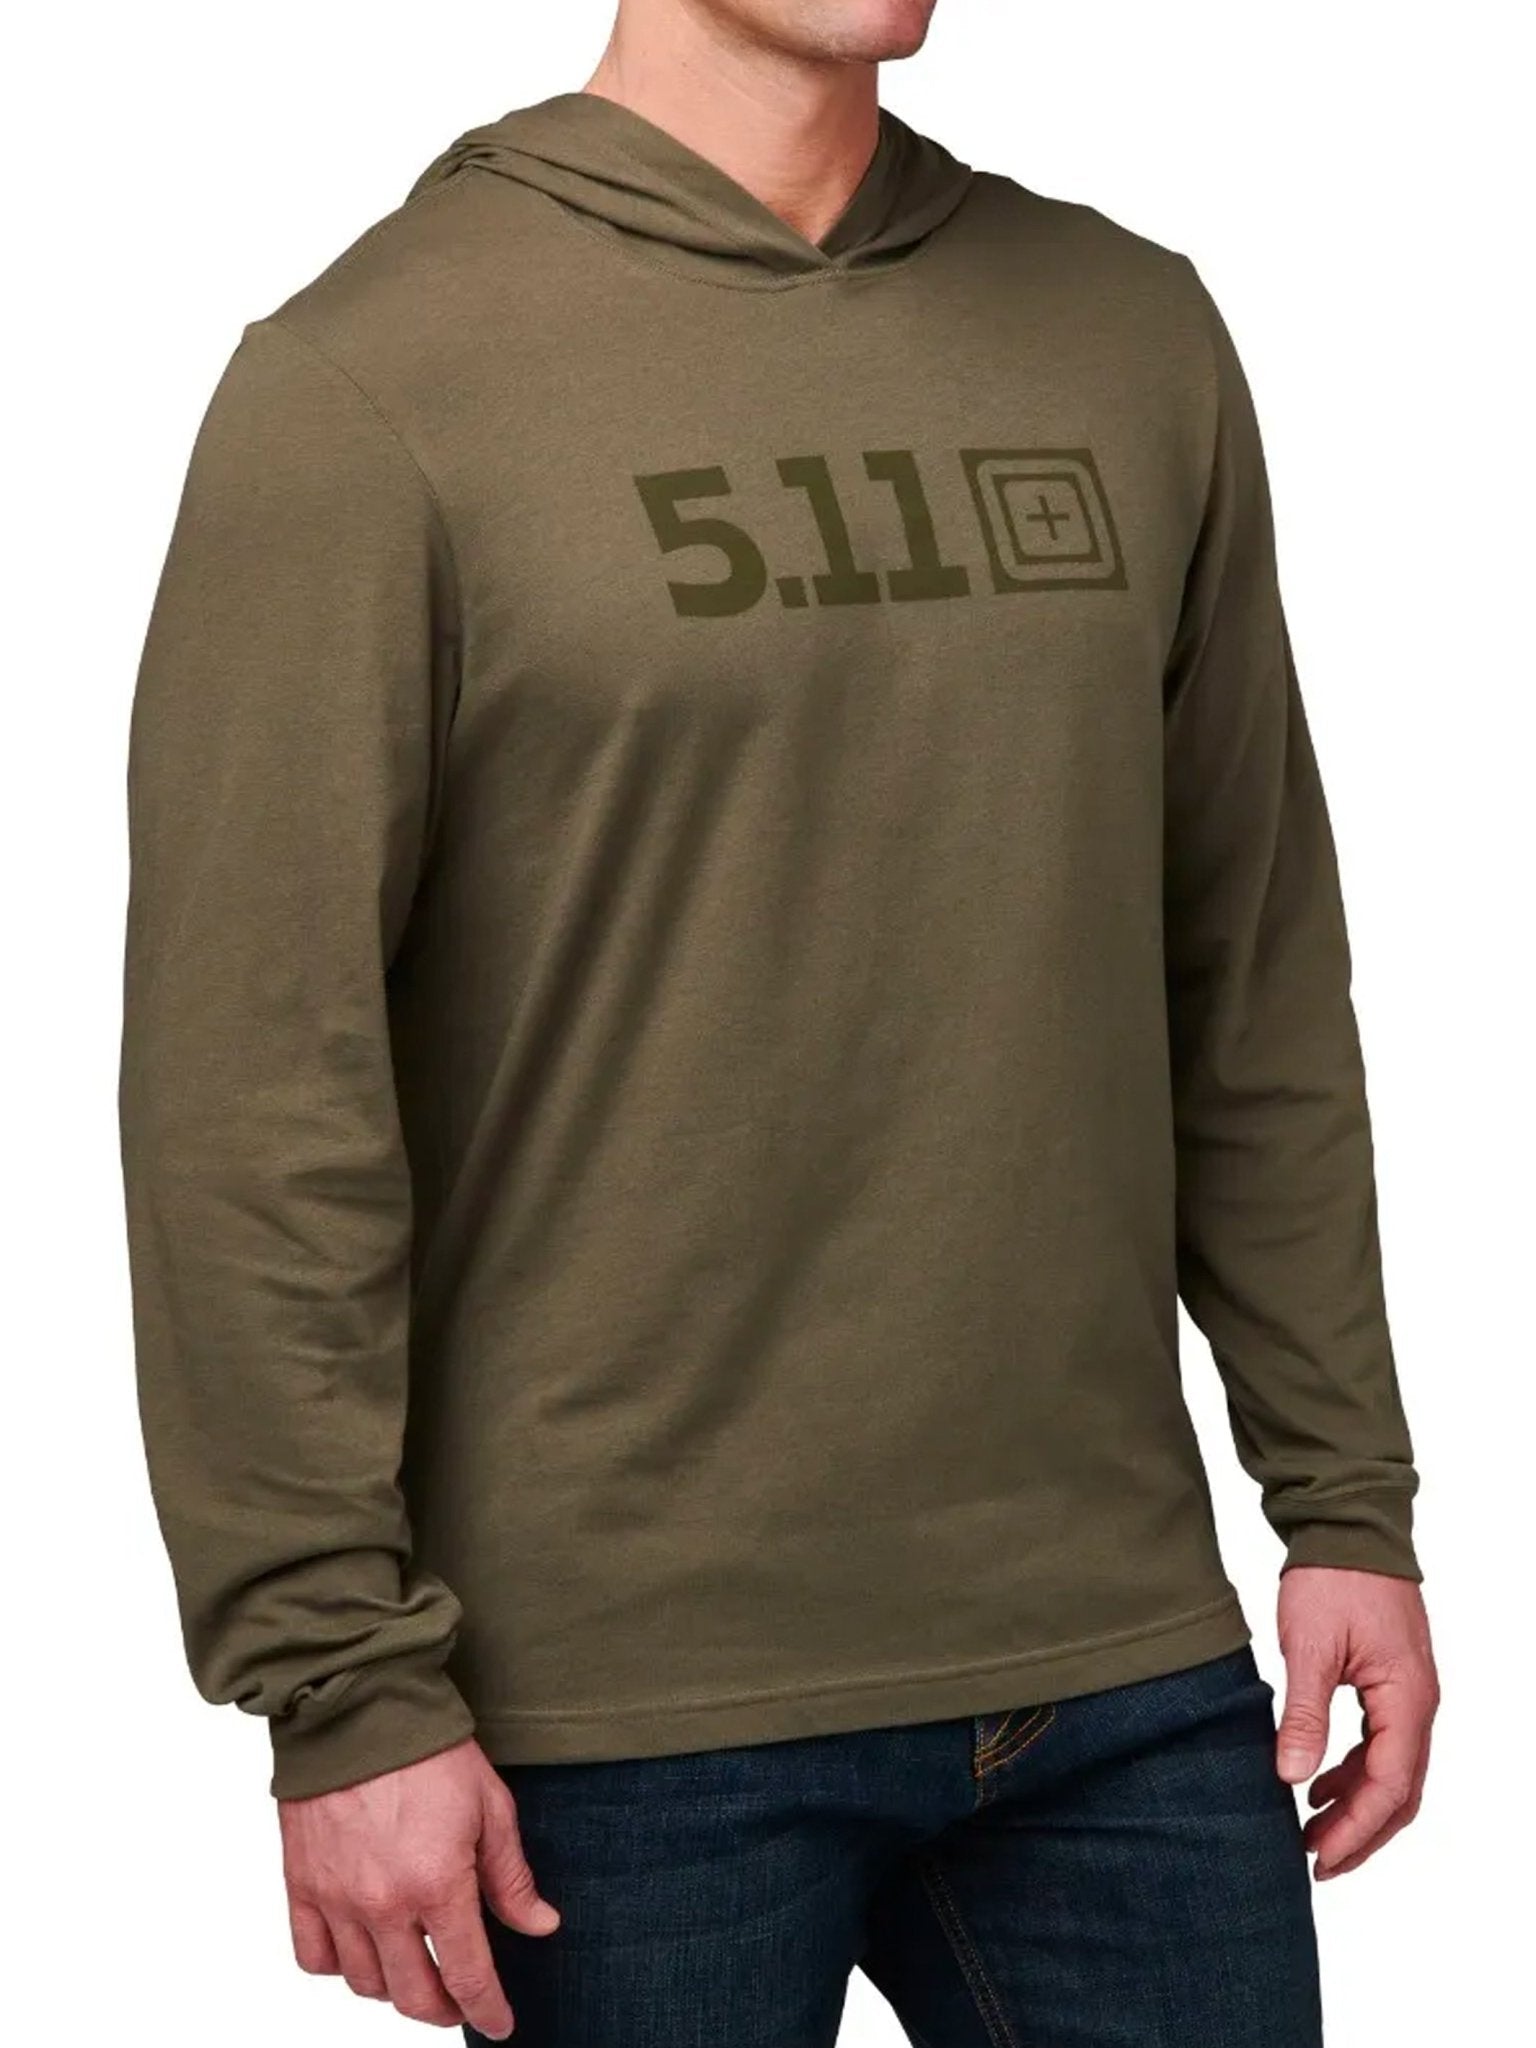 4elementsclothing5.11 Tactical5.11 Tactical - 5.11 HOODED LONG SLEEVE TEE Cotton Polyester moisture wicking - Style 76165T-Shirt76165-721-S